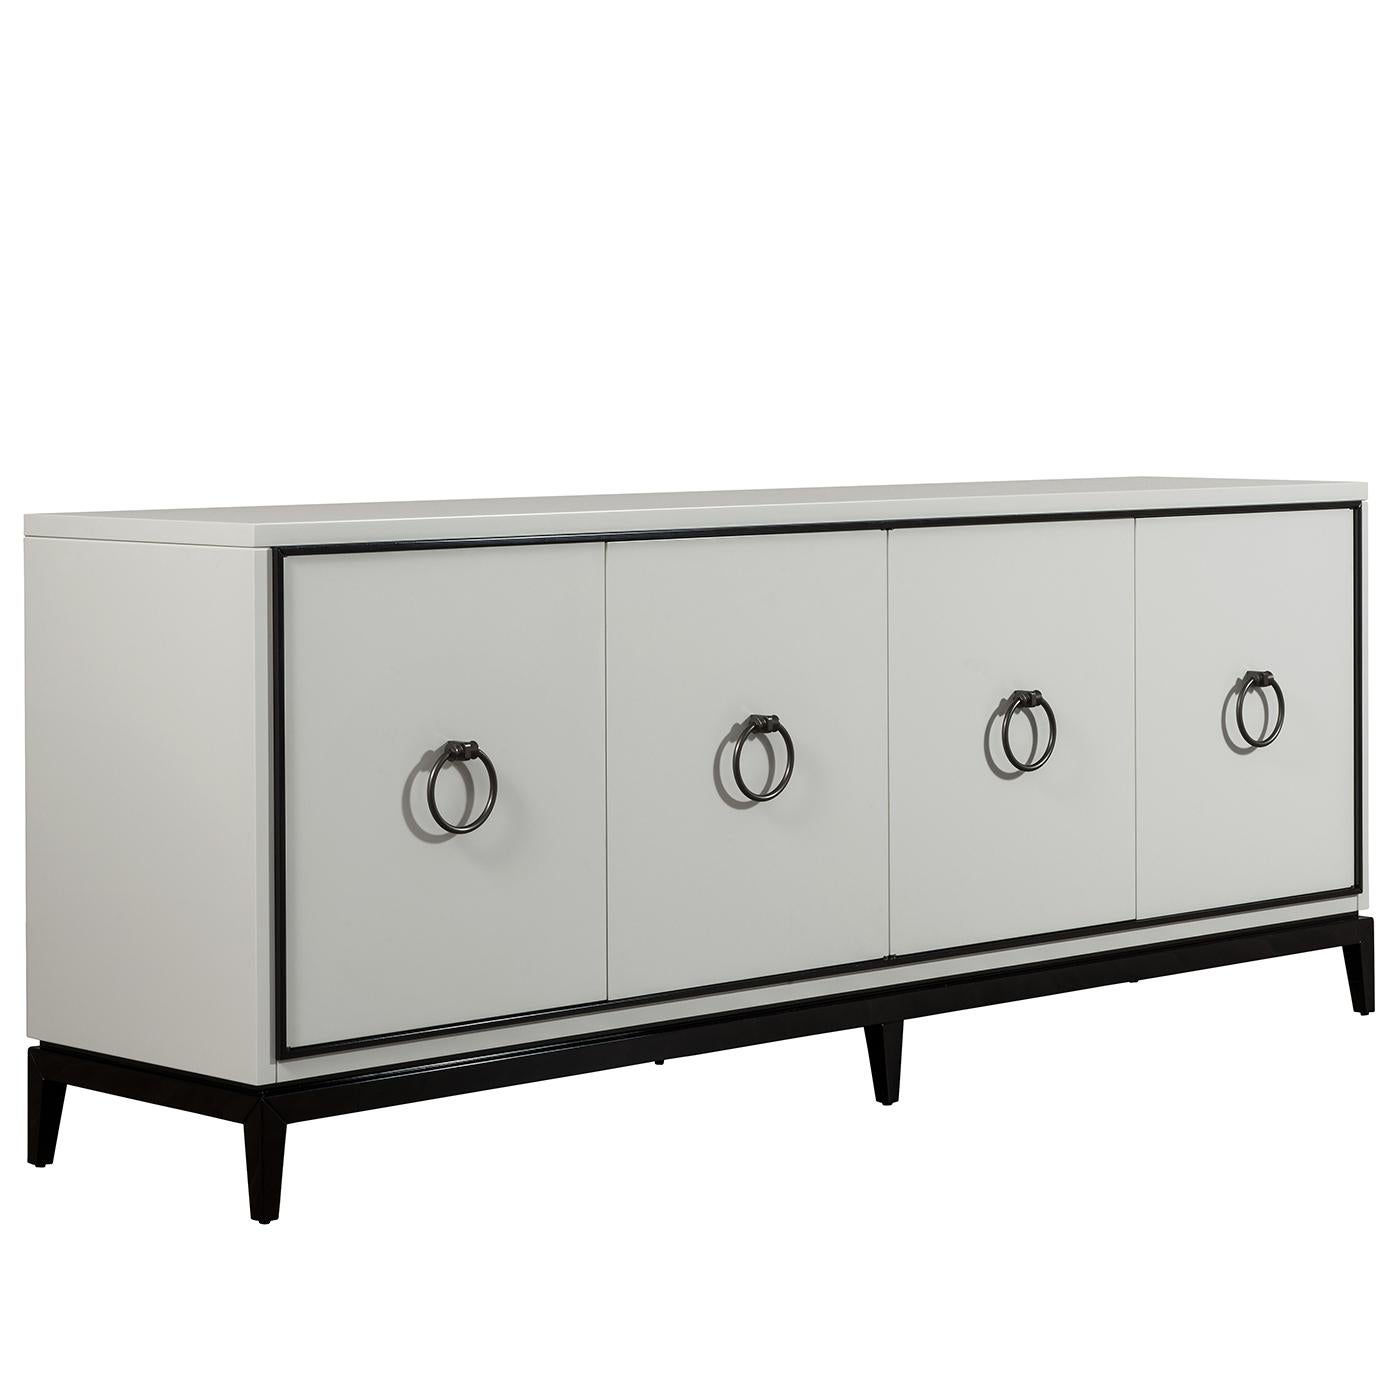 Timeless and sophisticated, this sideboard will add a bright decorative accent and precious storage space into a modern home. Its structure was crafted of wood with a visible base in solid wood that is also present in the profiles of the four doors.